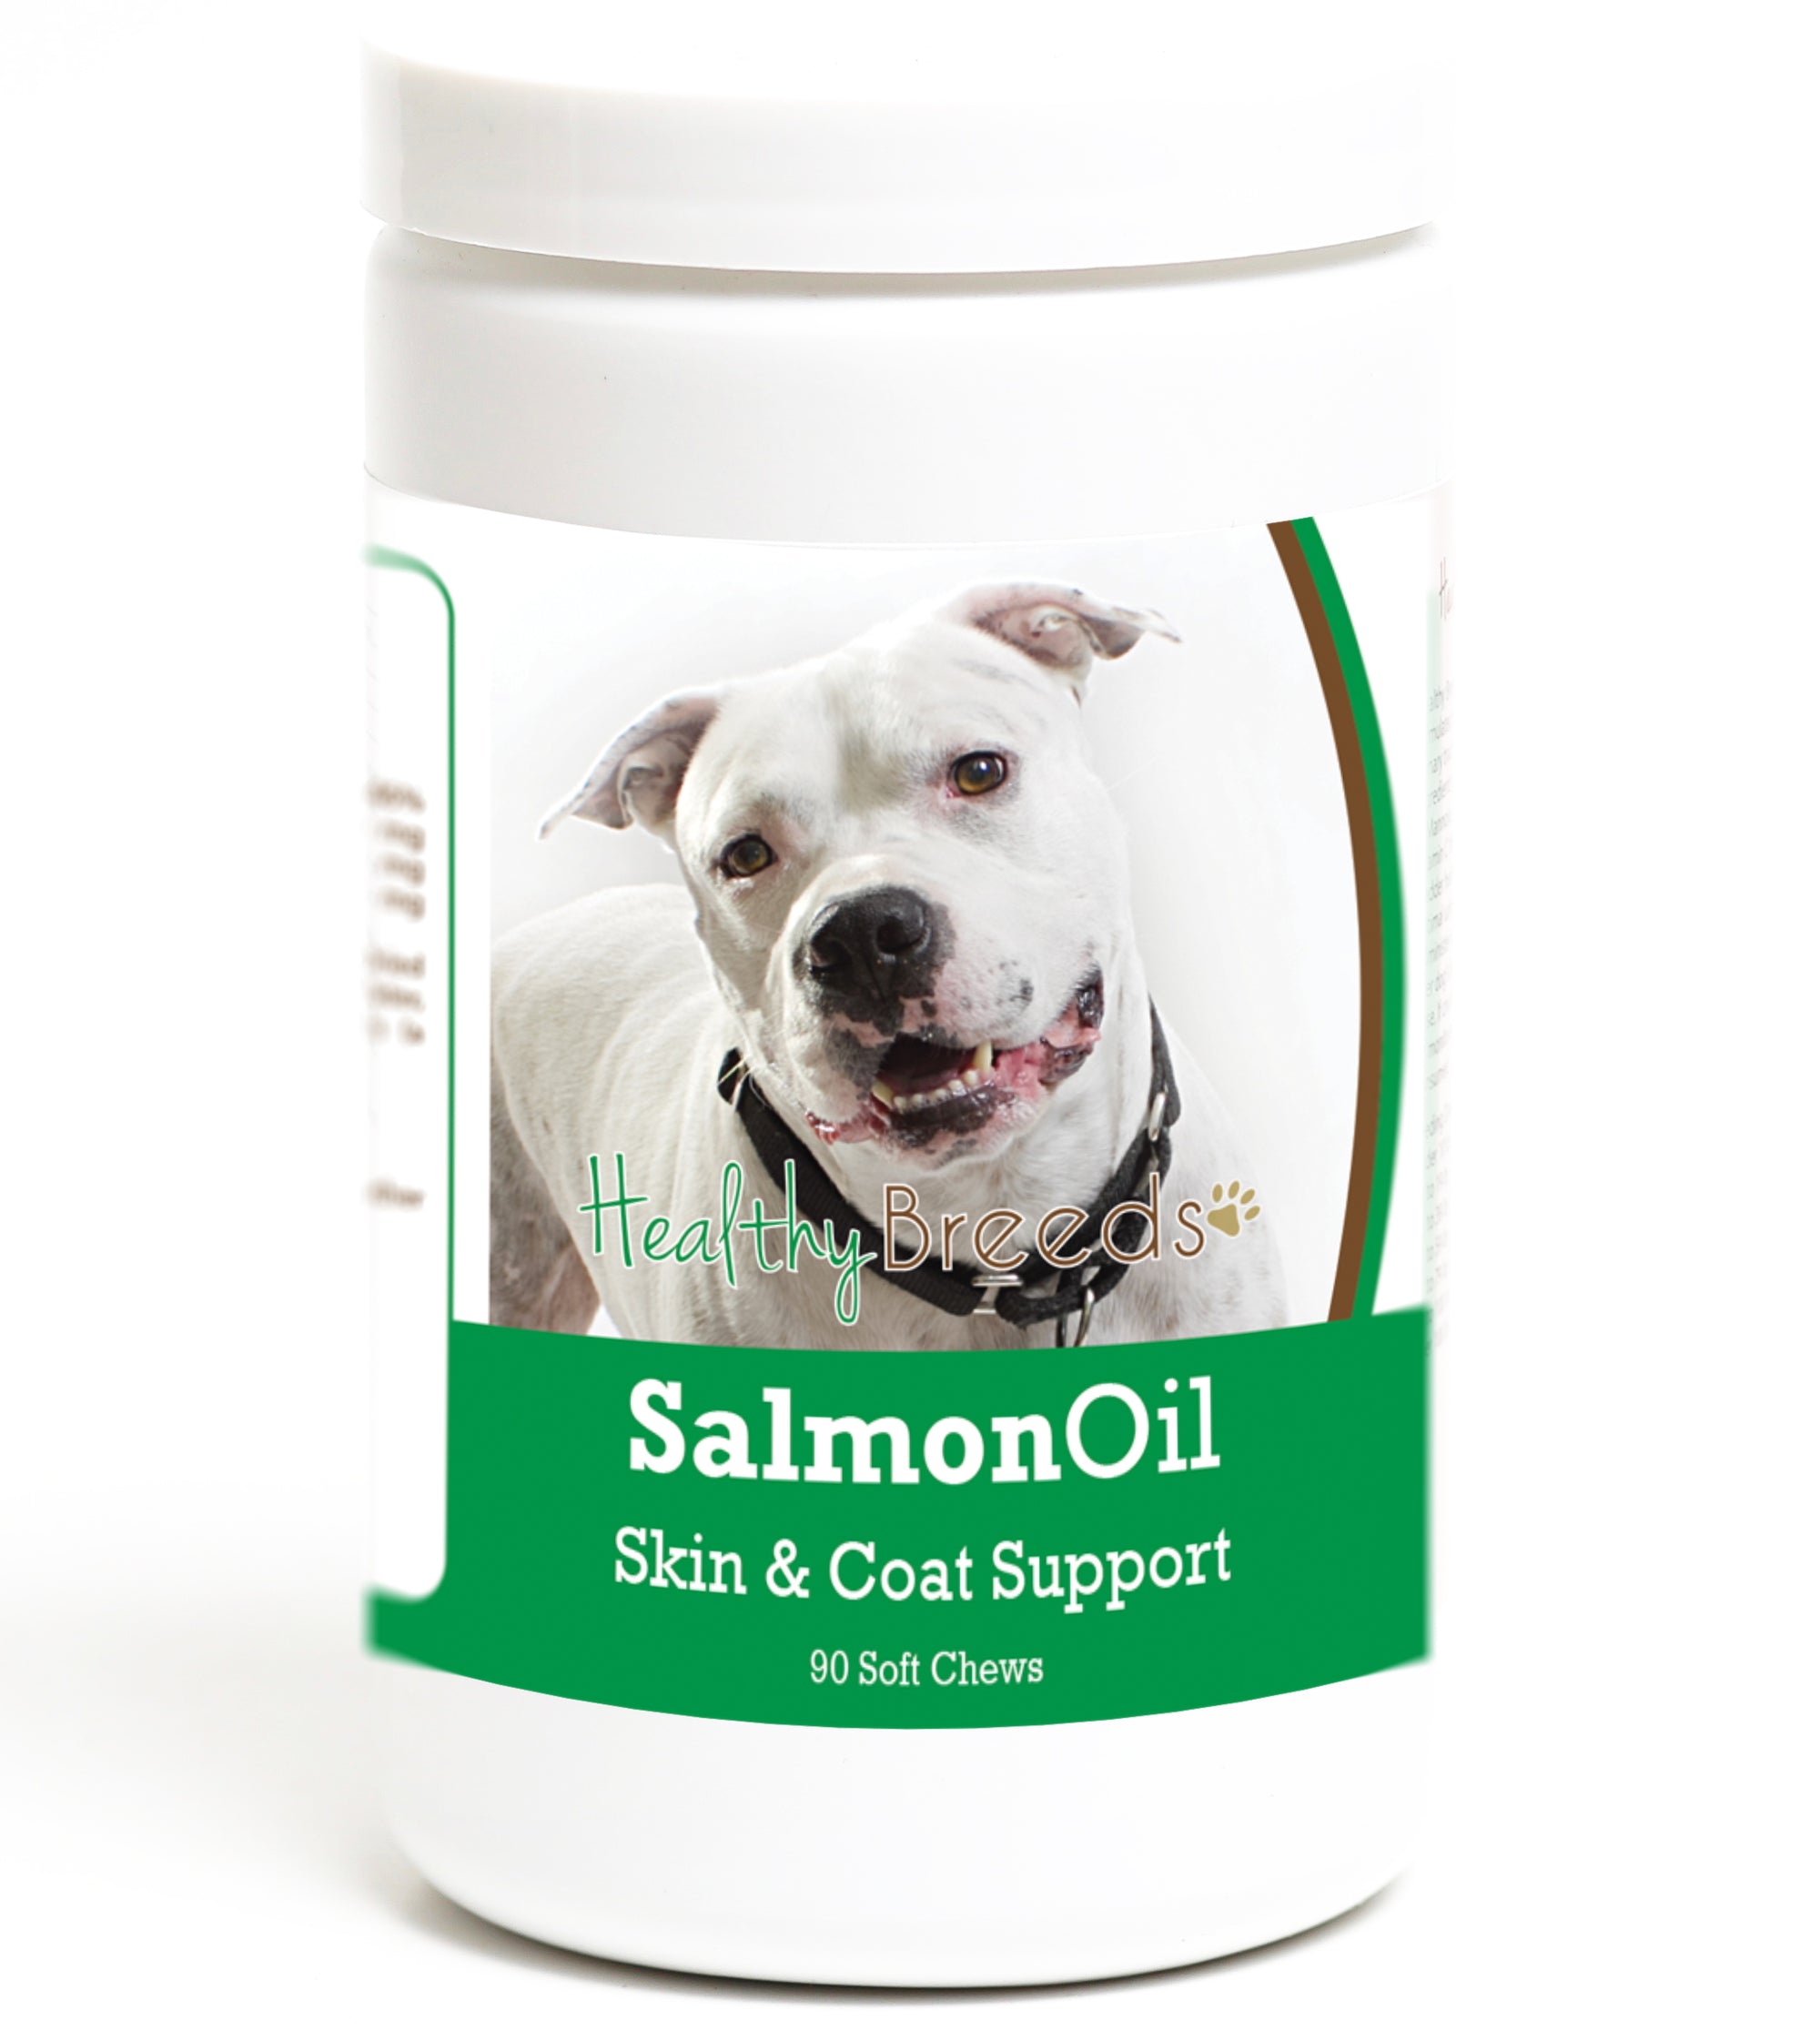 Healthy Breeds Pit Bull Salmon Oil Soft Chews 90 Count